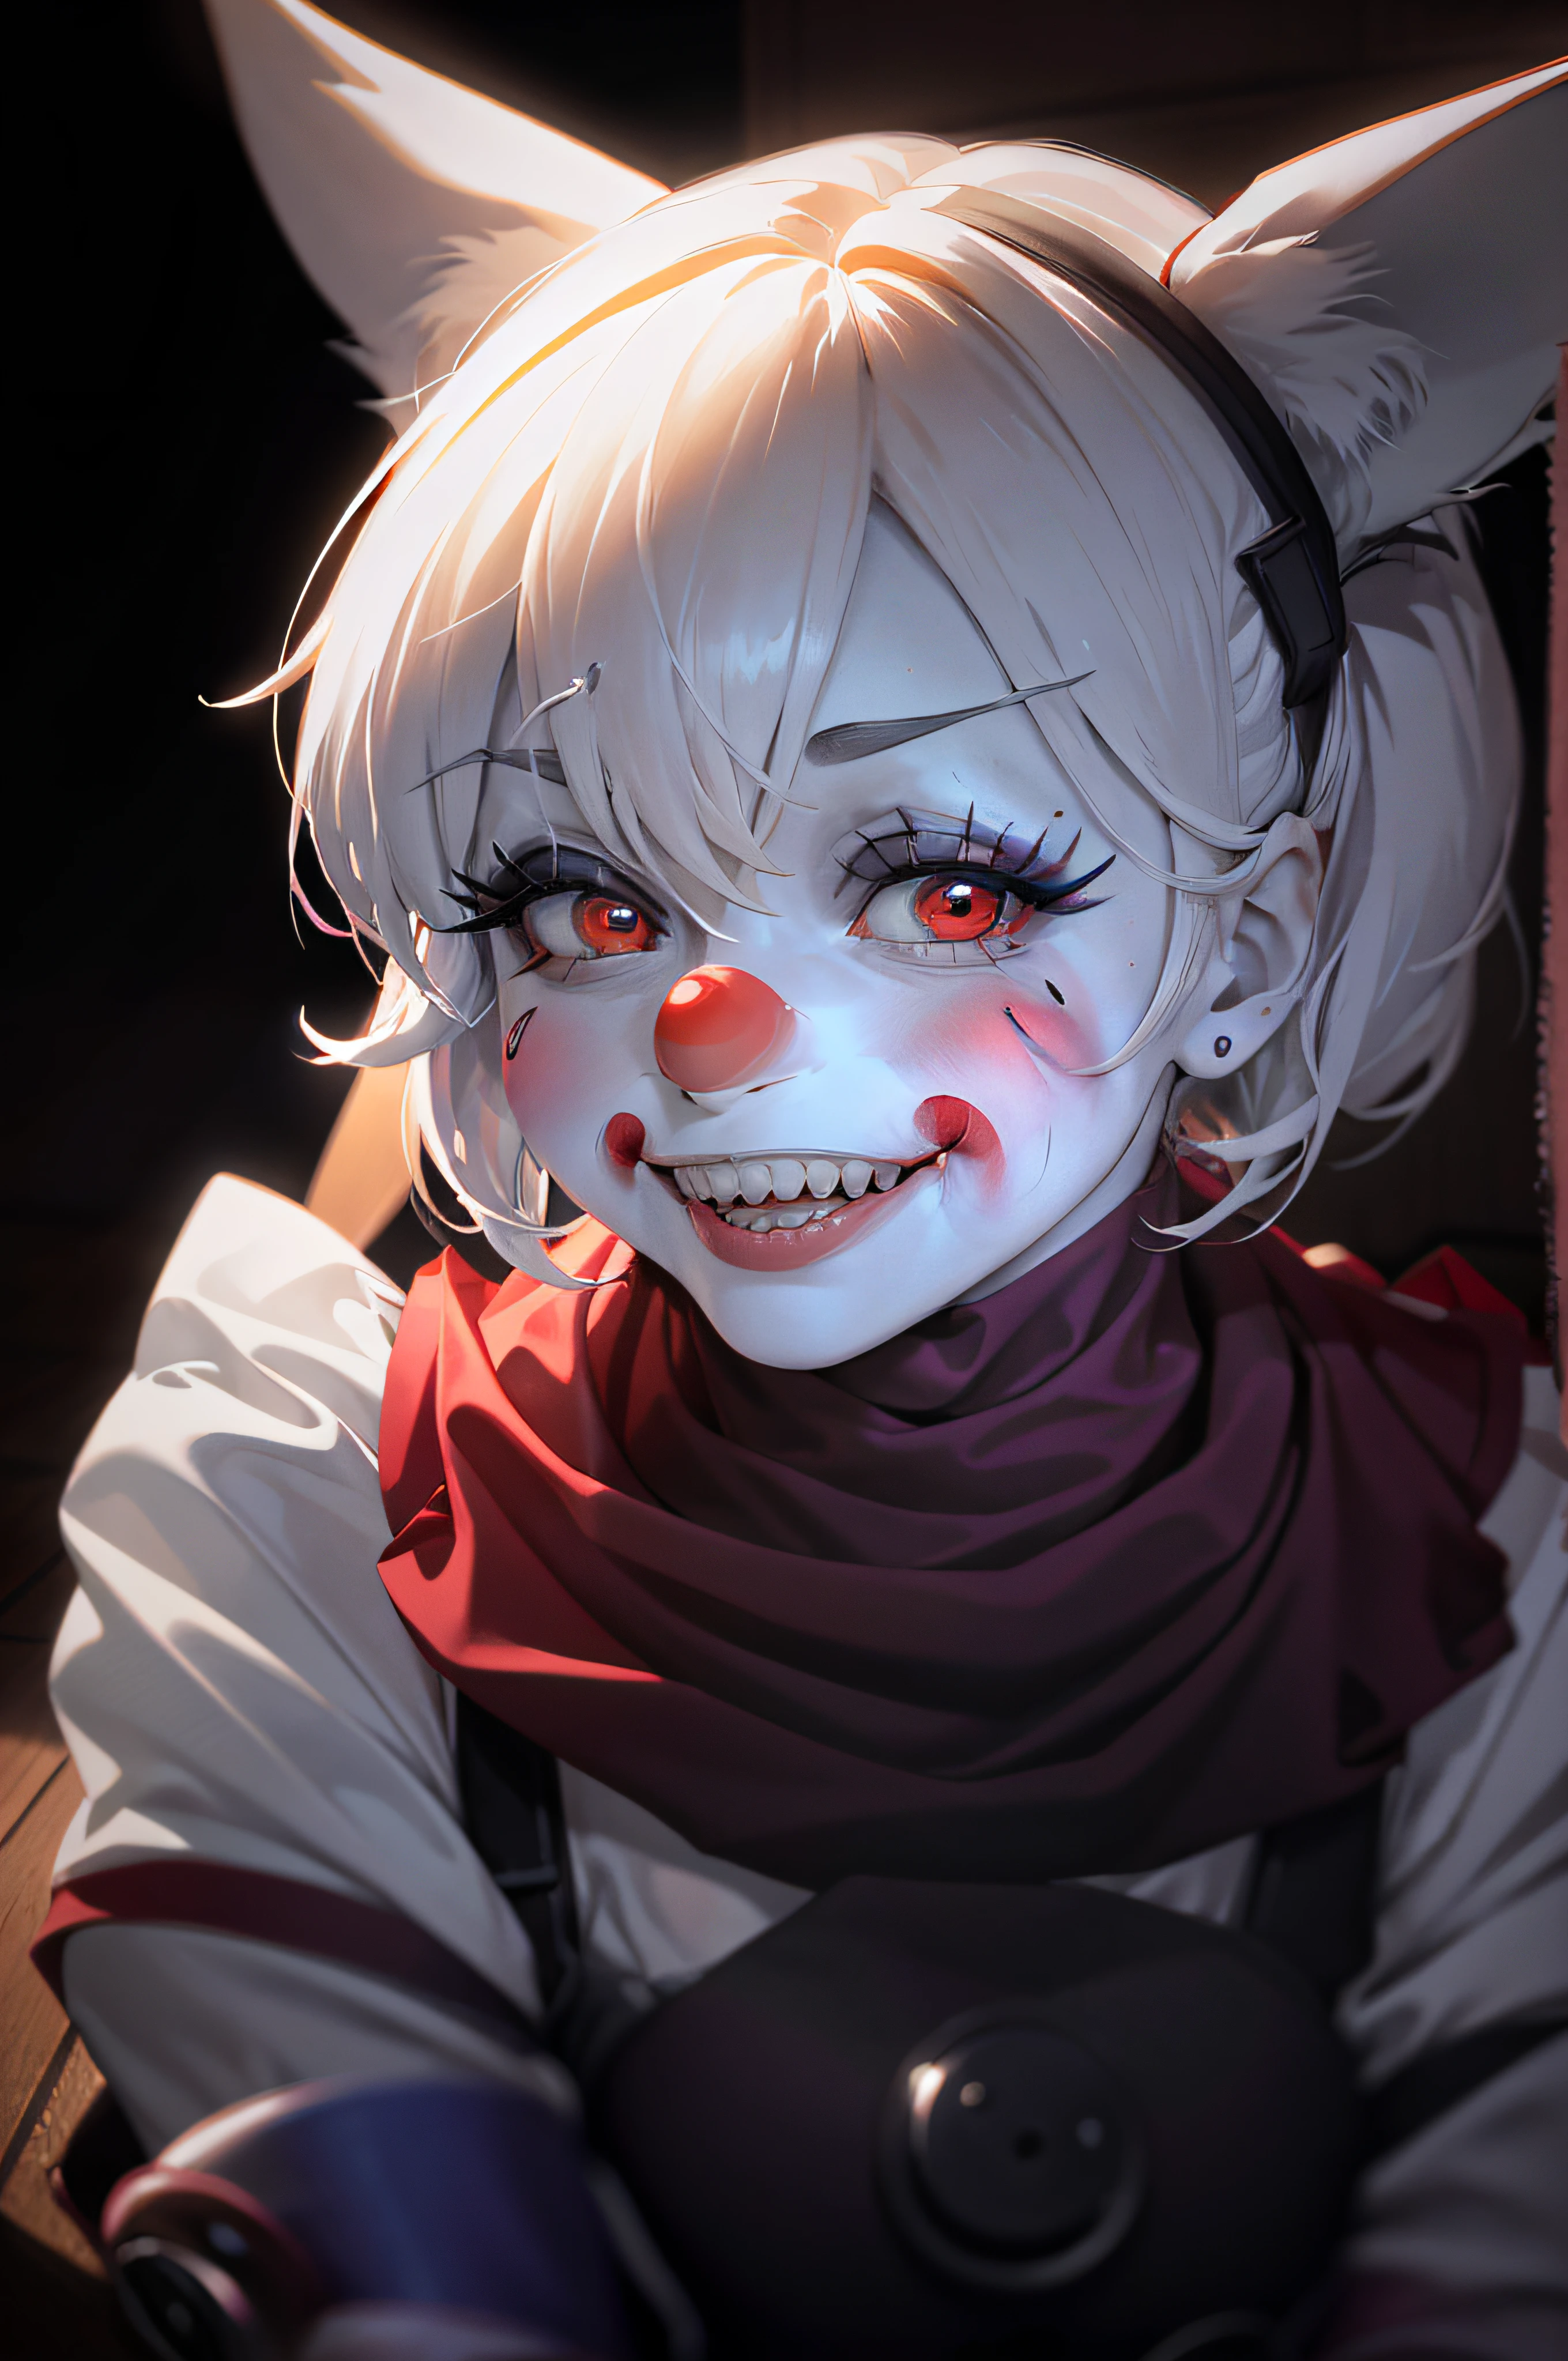 (,best quality, high resolution:1.3), dark dynamic lighting, dark lighting, exe (edgClussy:1.1) (sitting on end of hallway:1.2), looking, holding weapon, Exe, teeth, horror (theme), red eyes, smile, sharp teeth, glowing, dark, blood, tongue, grin, glowing eyes, evil smile, red clown nose,